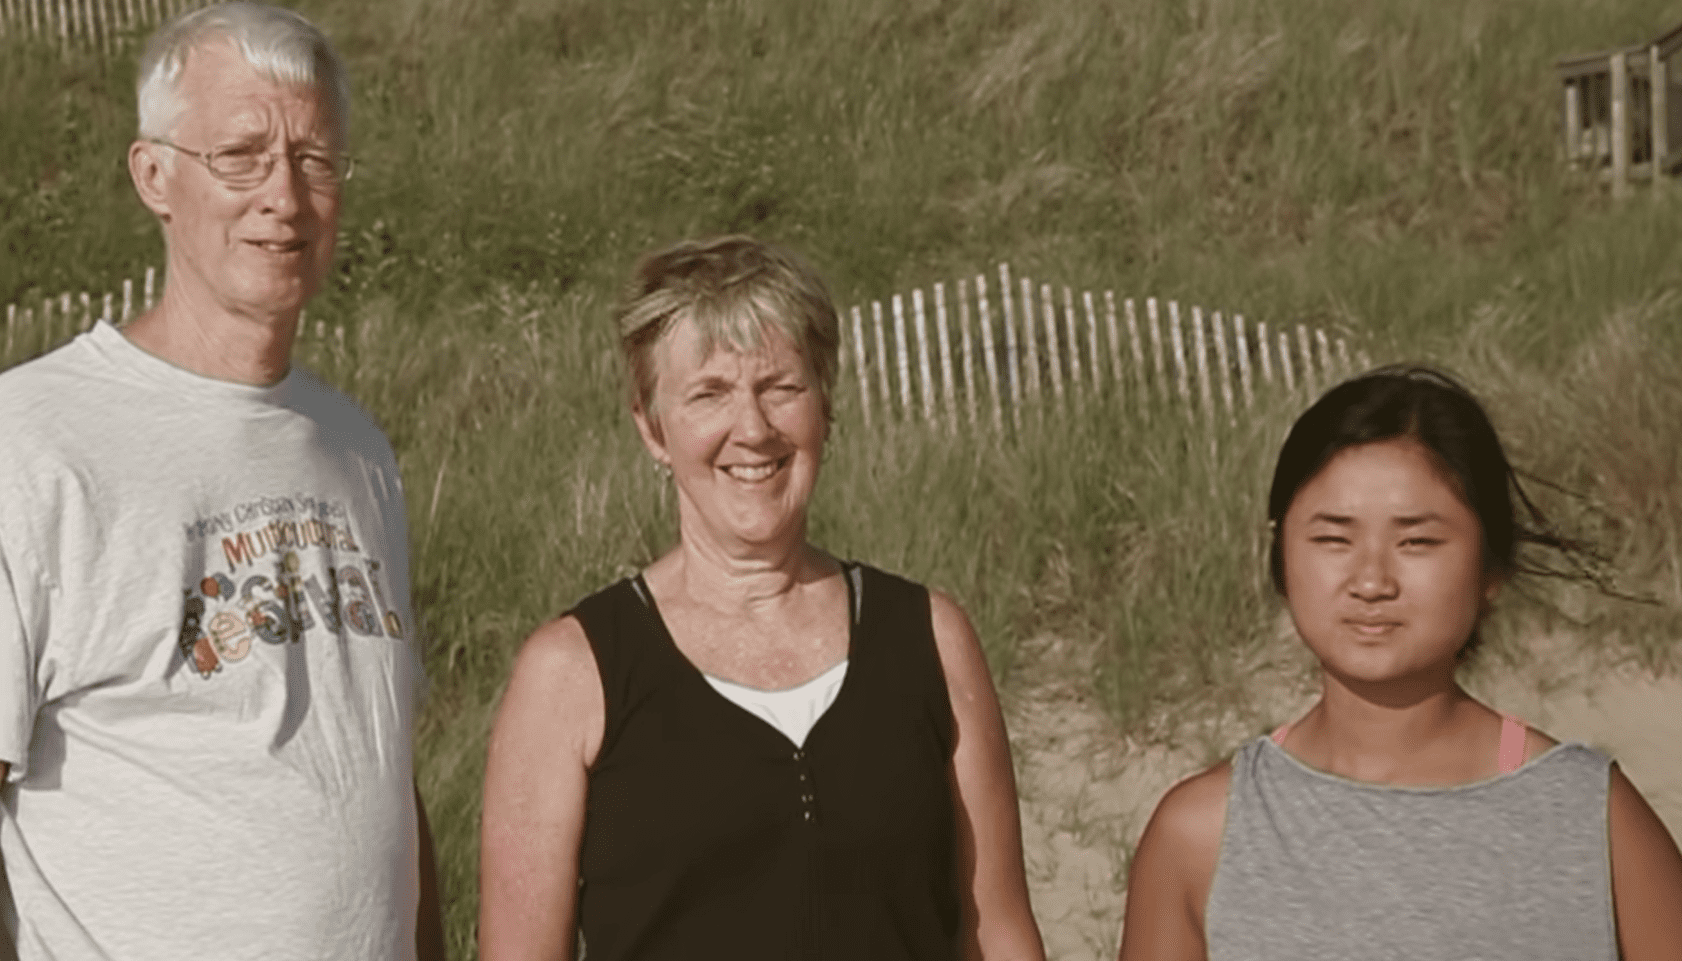 Kati Pohler and her adoptive parents, Ken and Ruth Pohler | Source: YouTube/BBC Stories